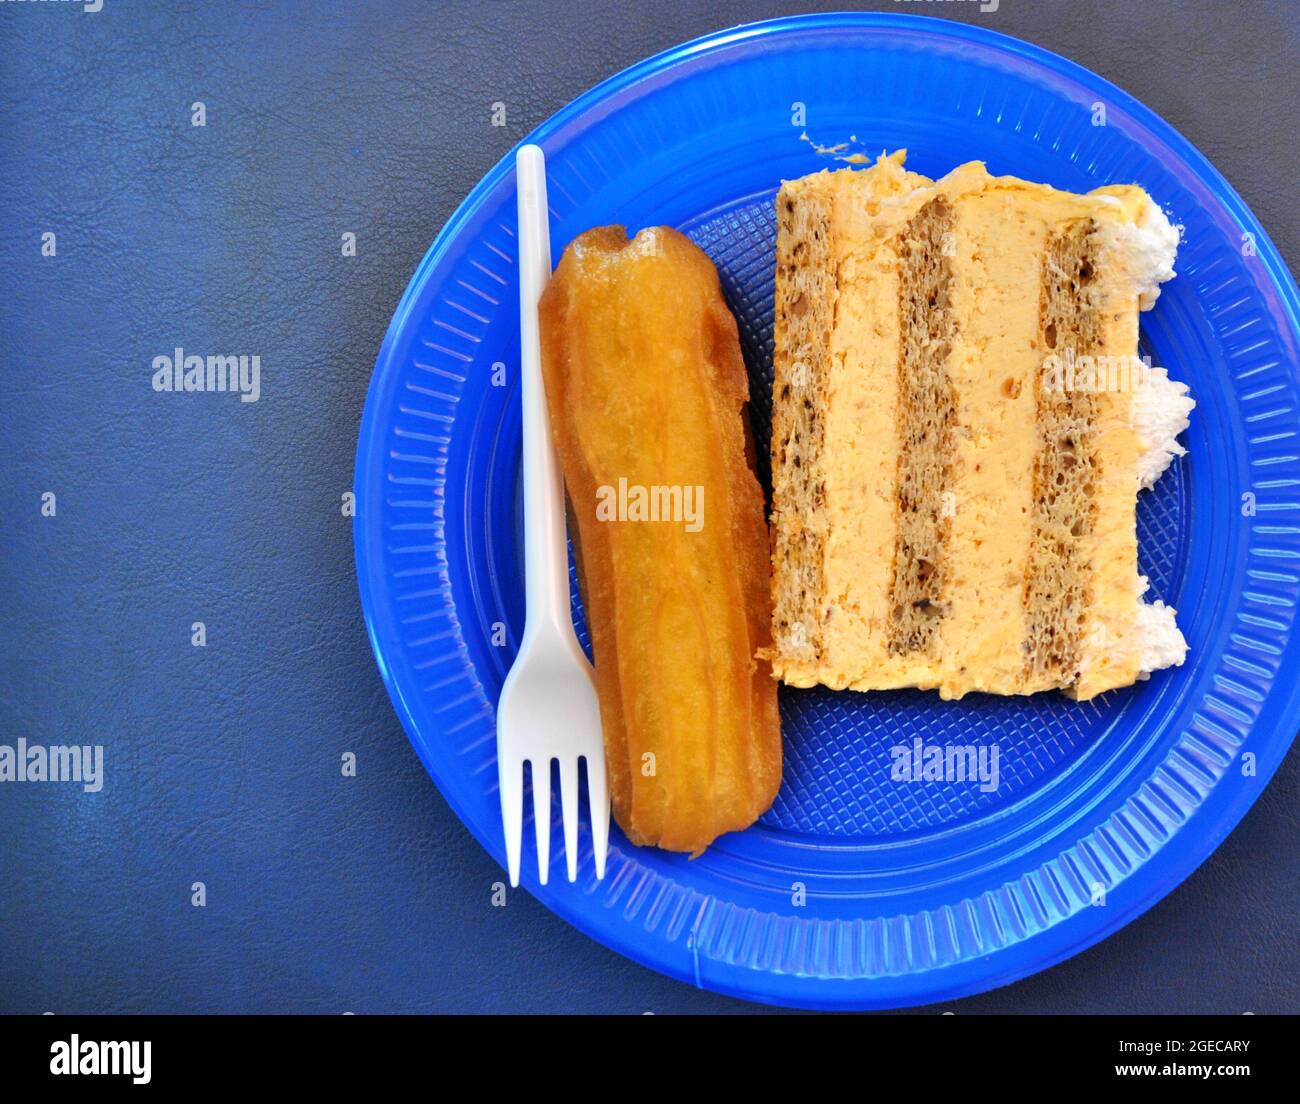 cake and turkuish sweet Tulumba dessert in a blue disposable plate top view.eastern an western cullture concept Stock Photo